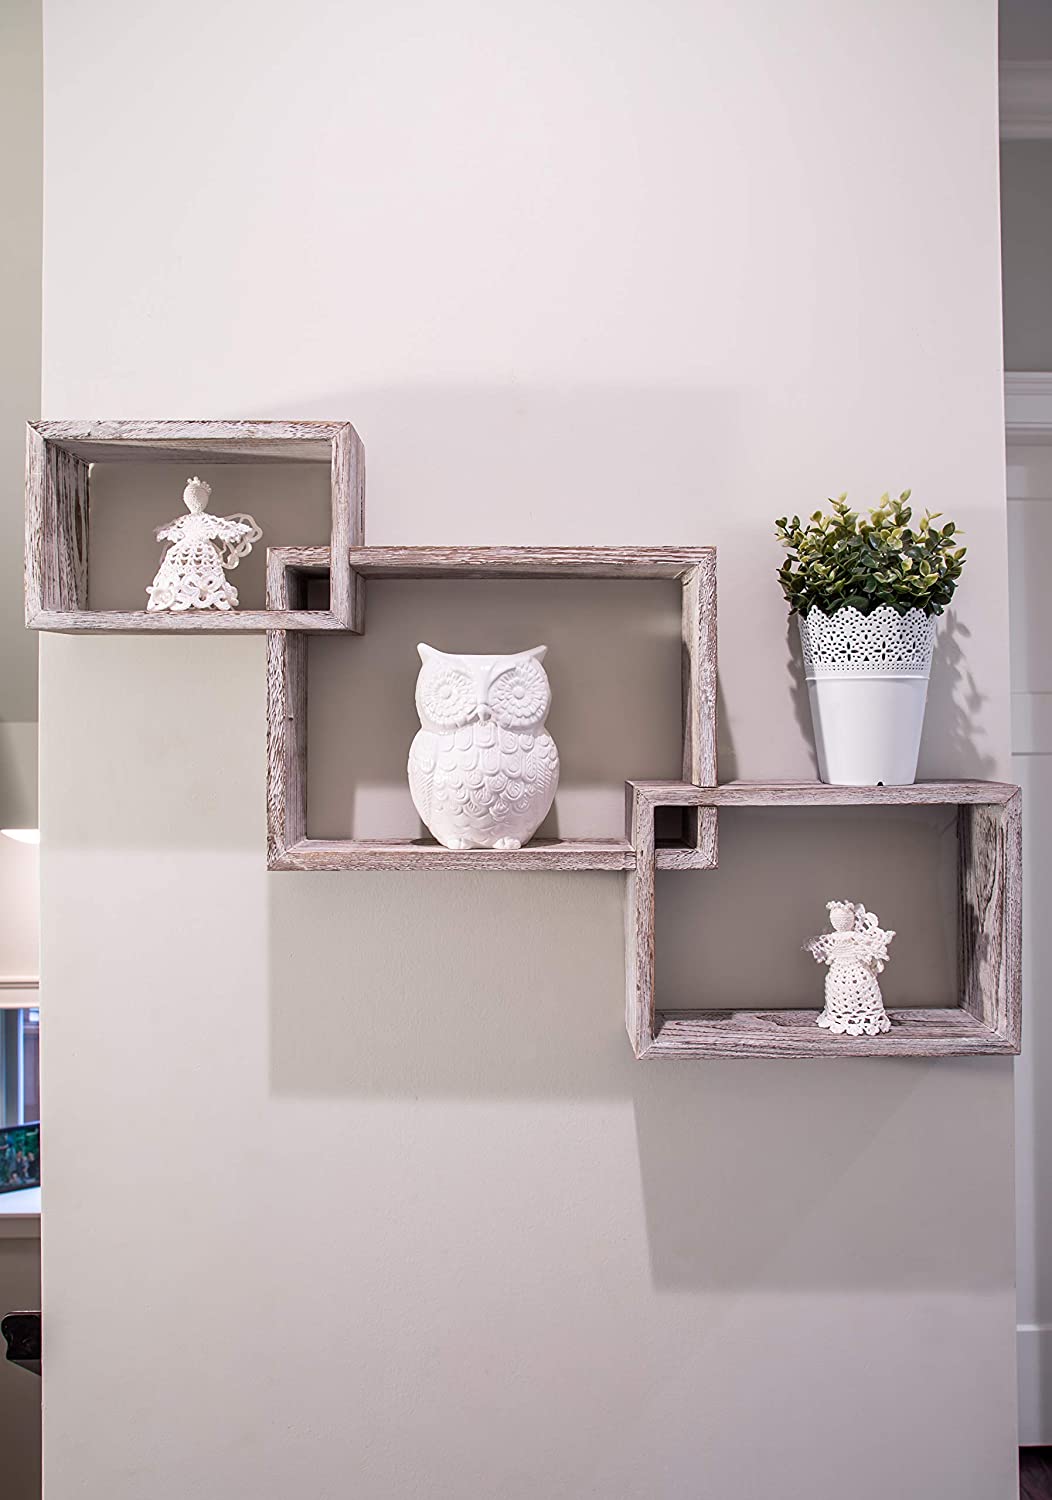 Wall Mounted Shelves - Property London: Architects & Property In London